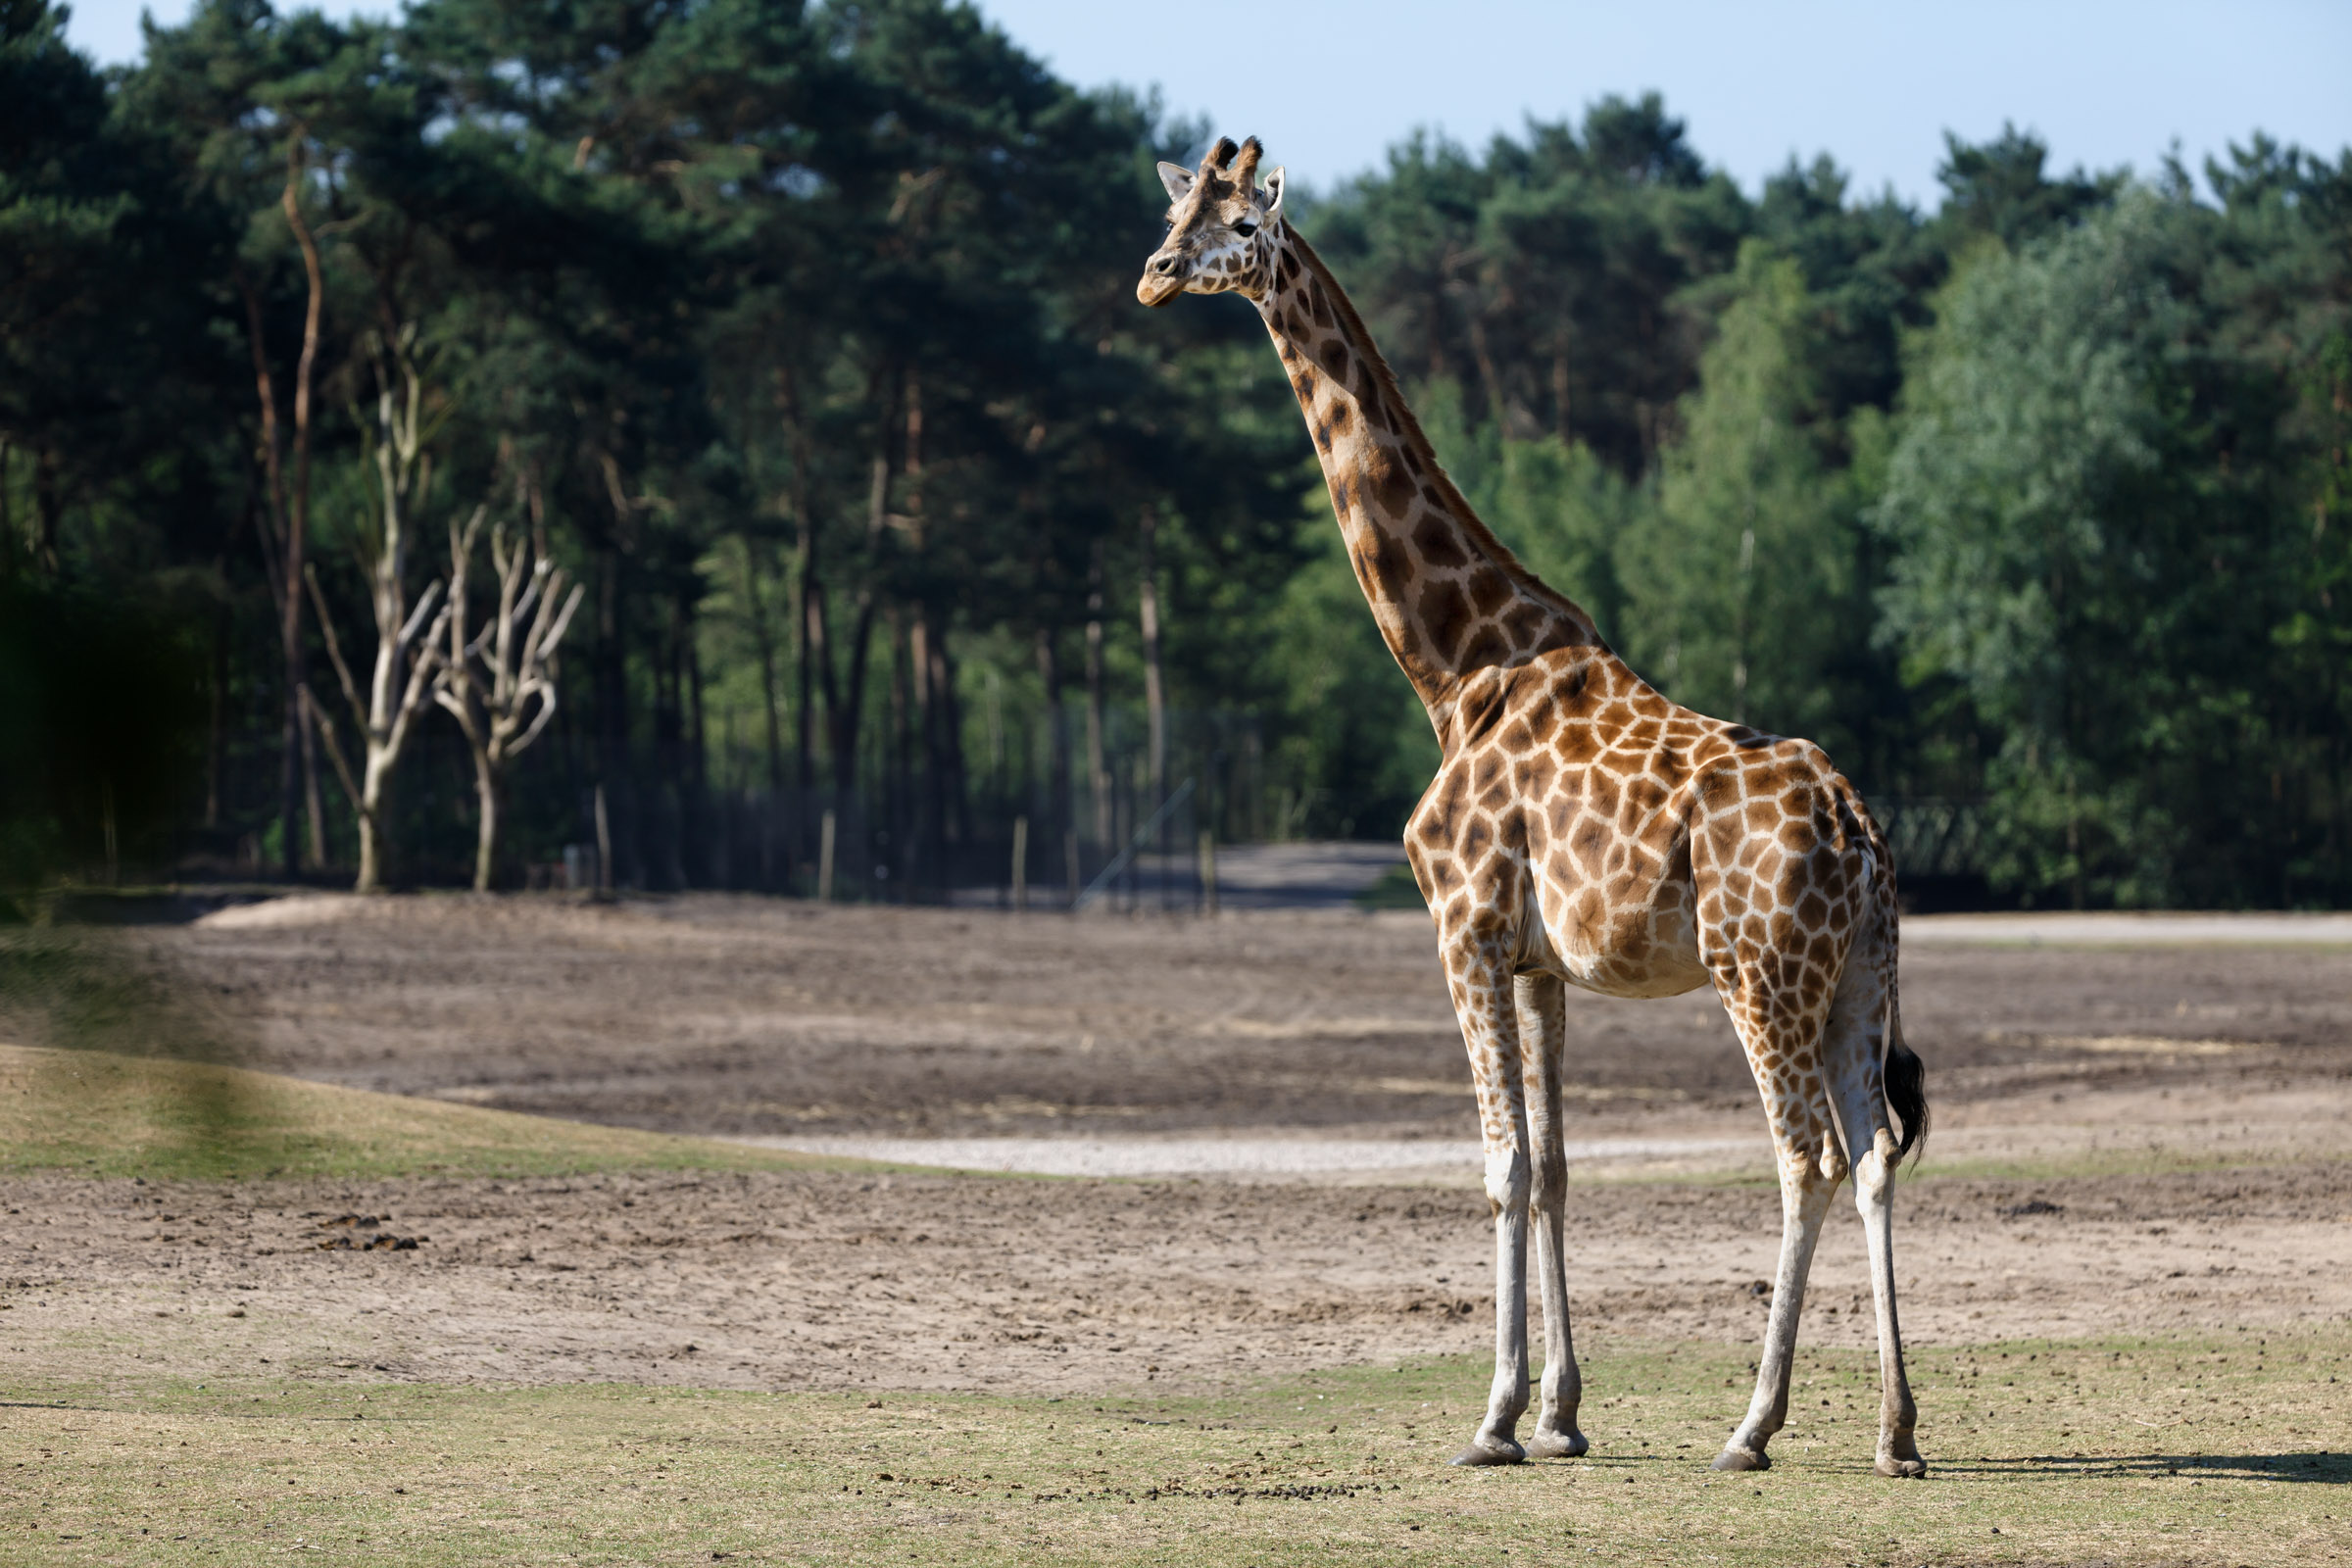 On safari | Face-to-face with wild animals | Beekse Bergen